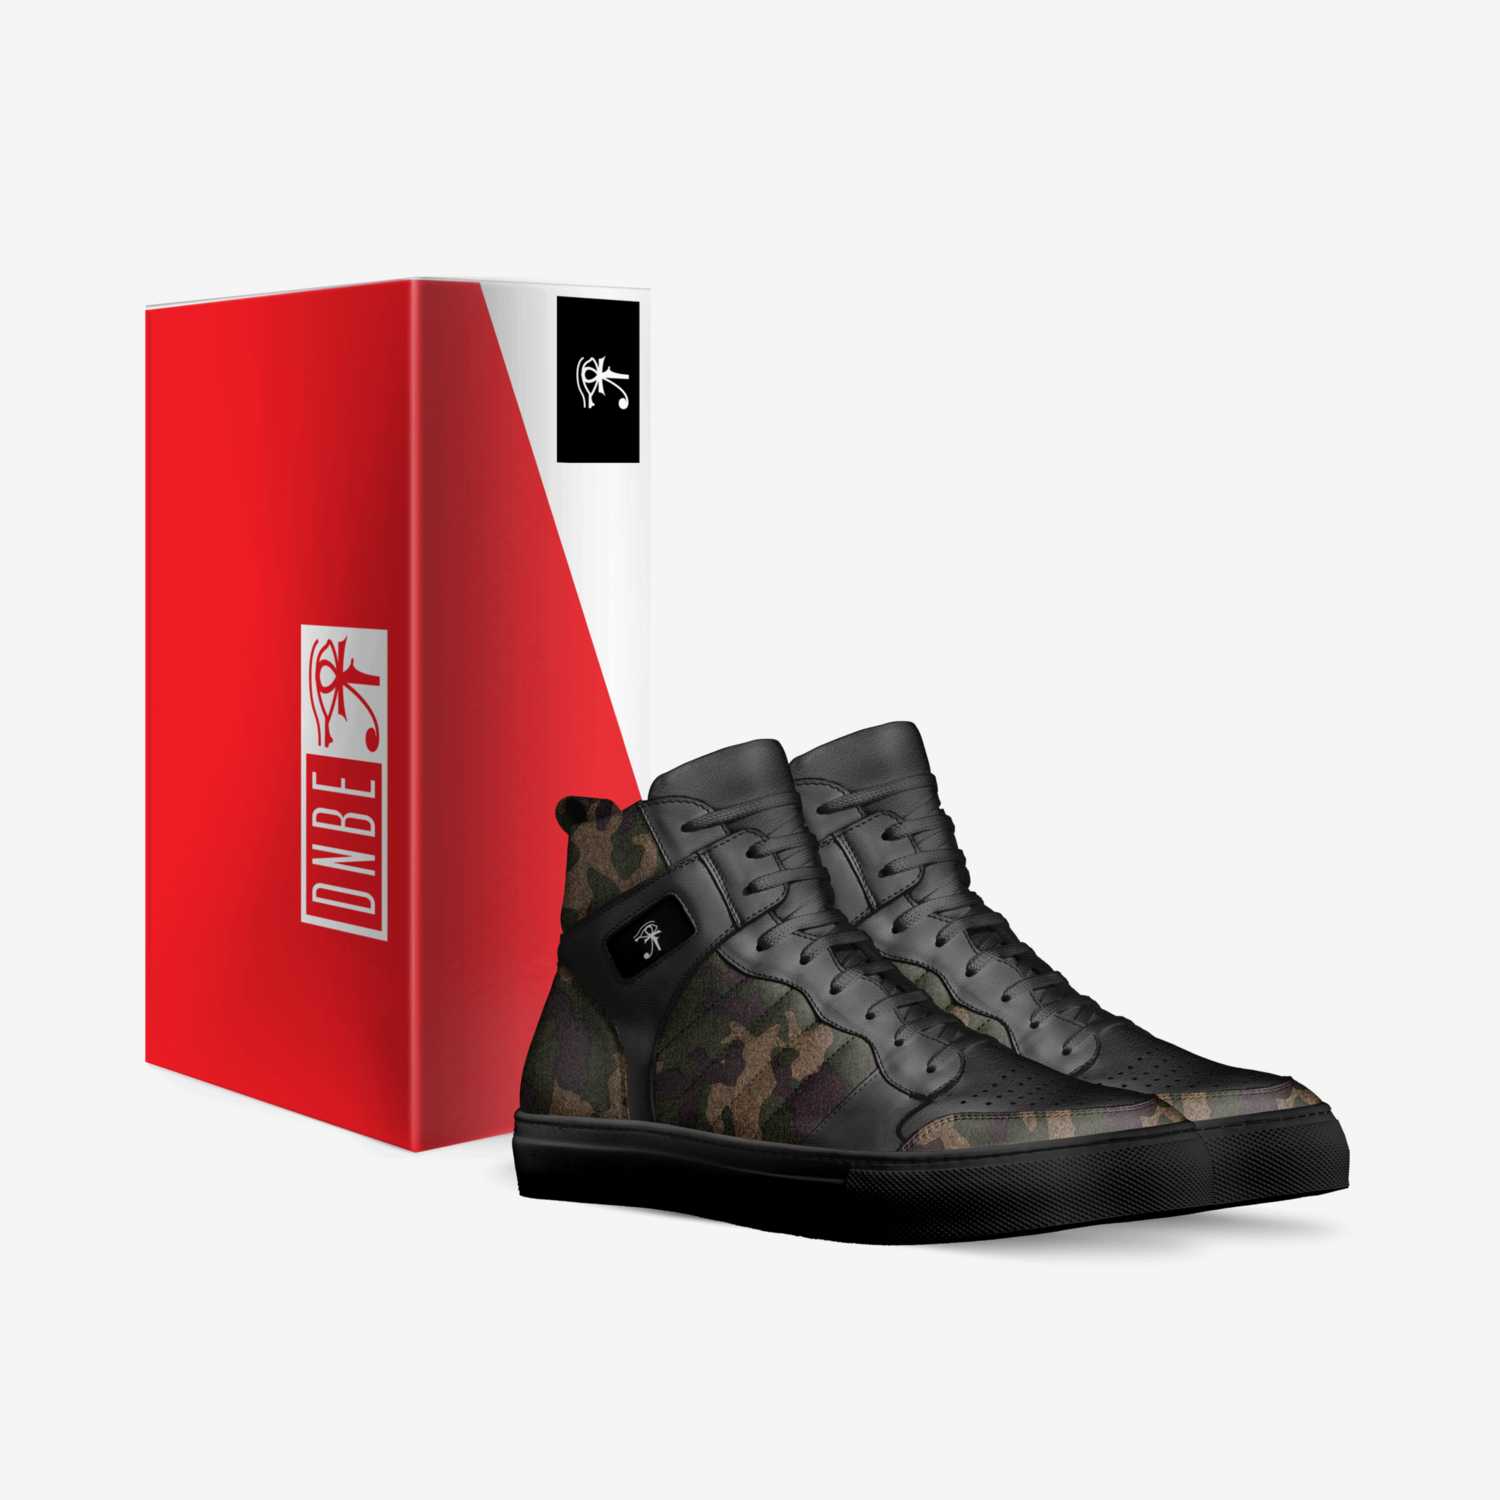 Shujaa II custom made in Italy shoes by Dnbe Apparel | Box view